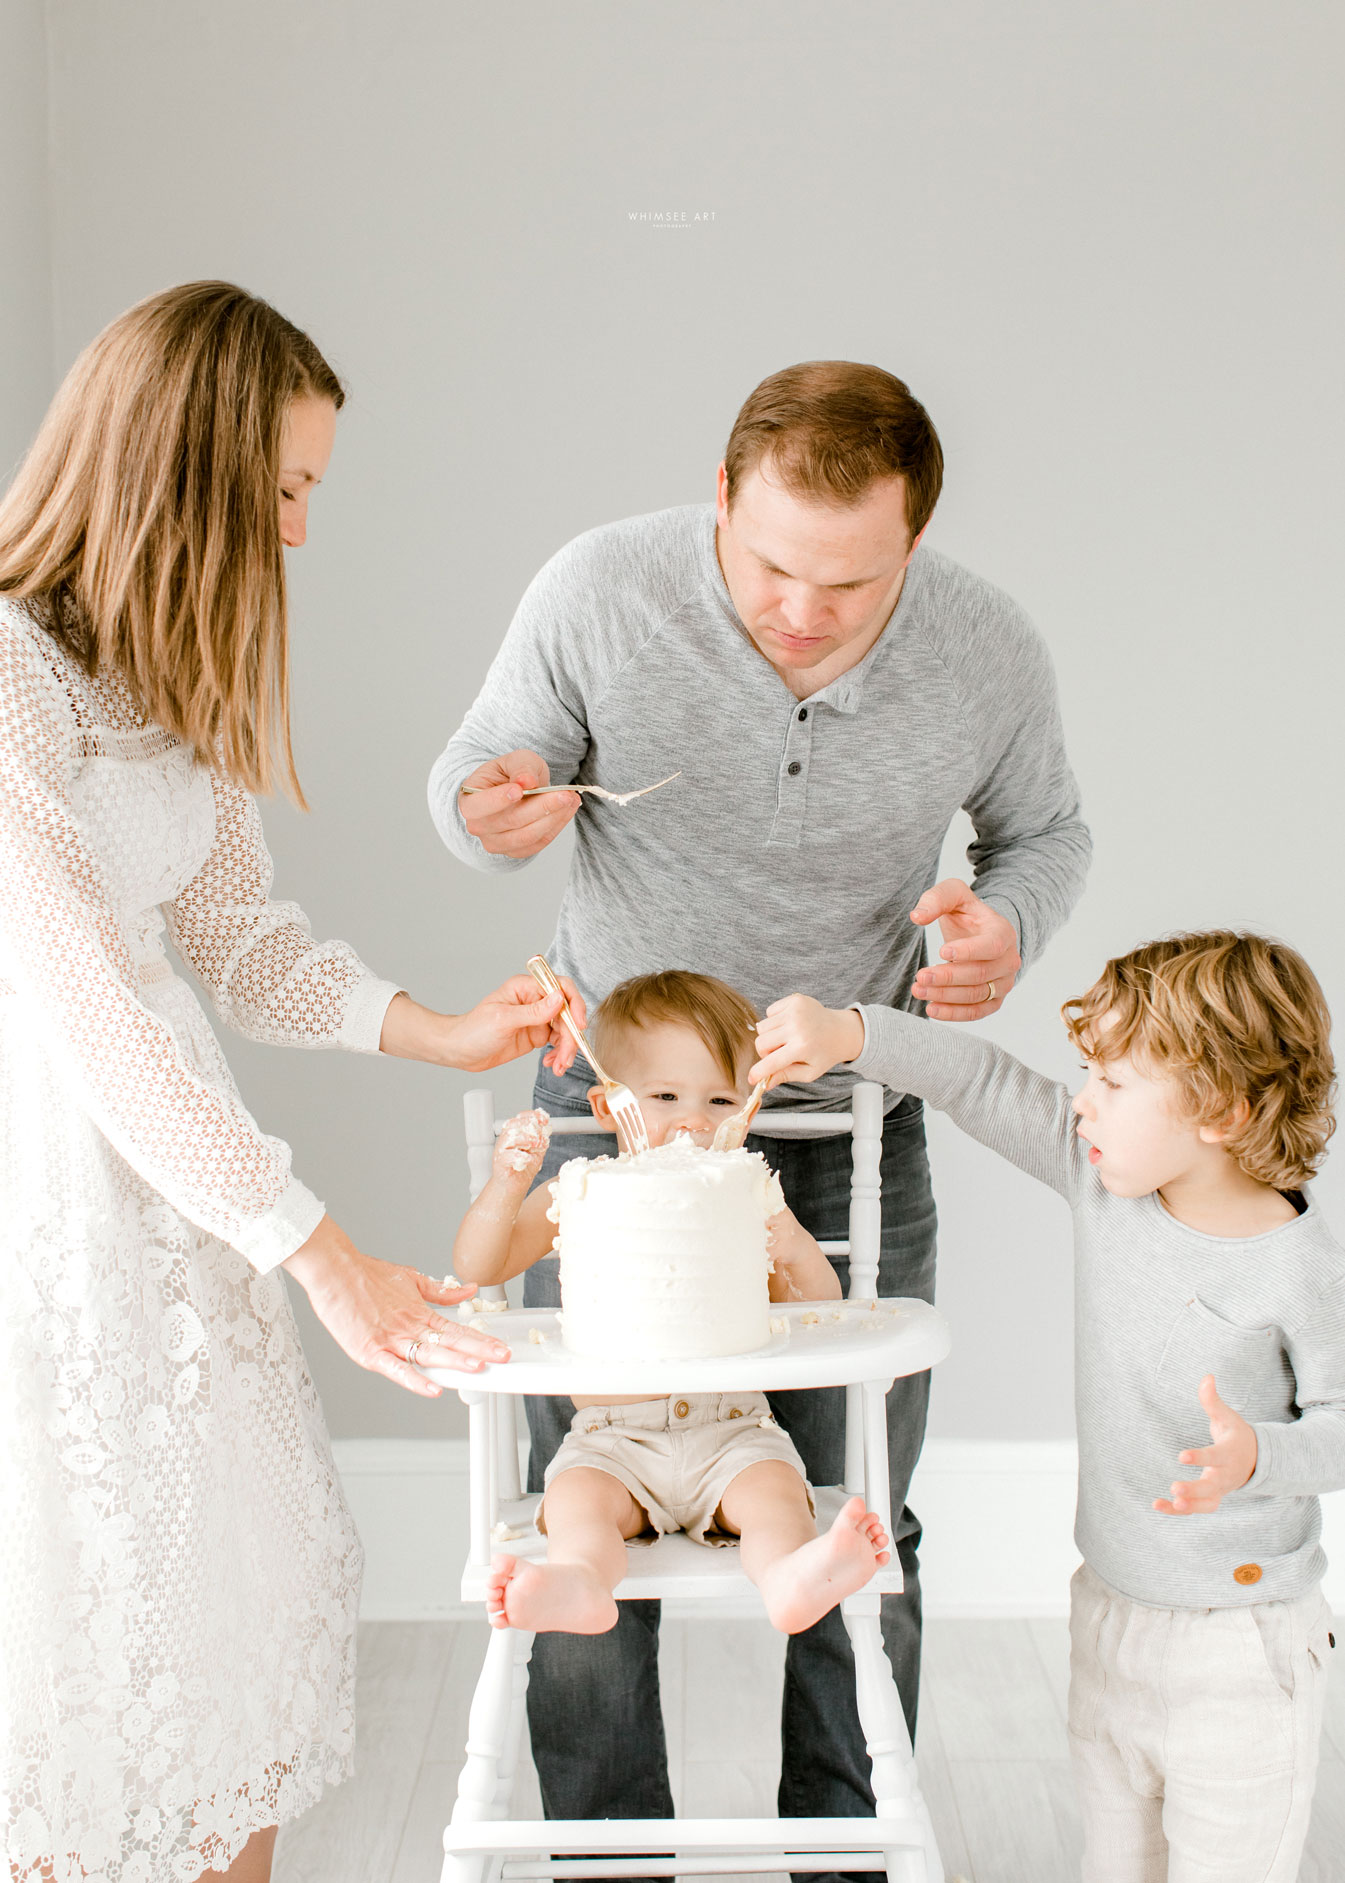 Benny Turns One | Roanoke Family Photographer |Whimsee Art Photography